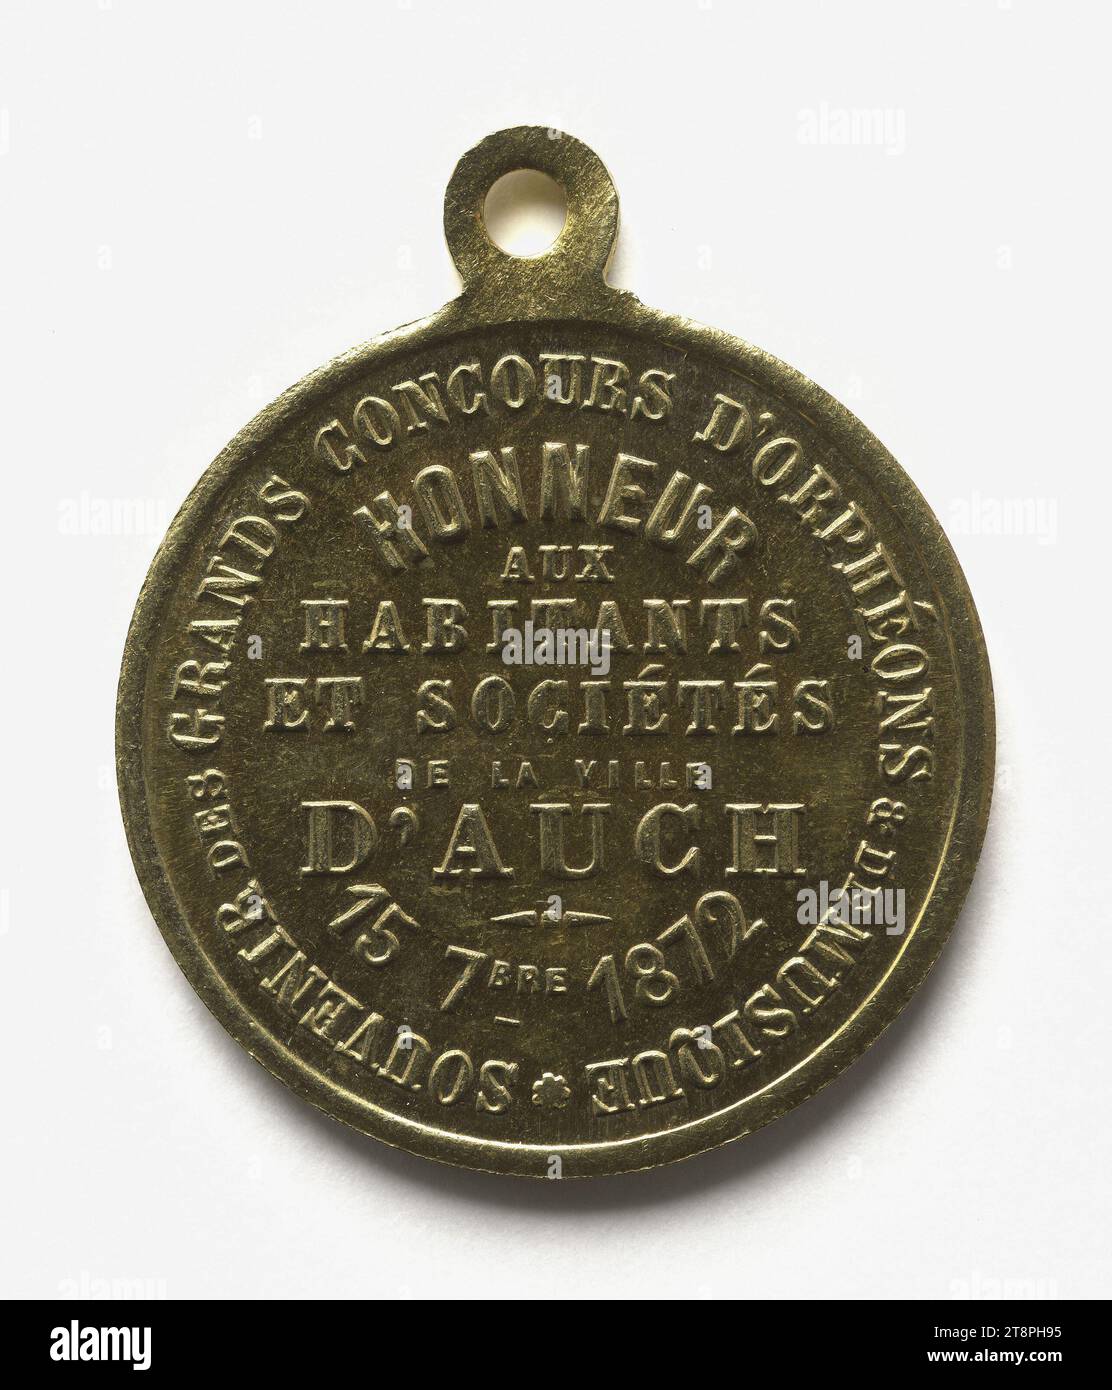 Great contest of orphéons and music in Auch, September 15, 1872, Array, Numismatic, Medal, Copper, Gilt = gilding, Dimensions - Work: Diameter: 2.3 cm, Weight (type dimension): 4.28 g Stock Photo